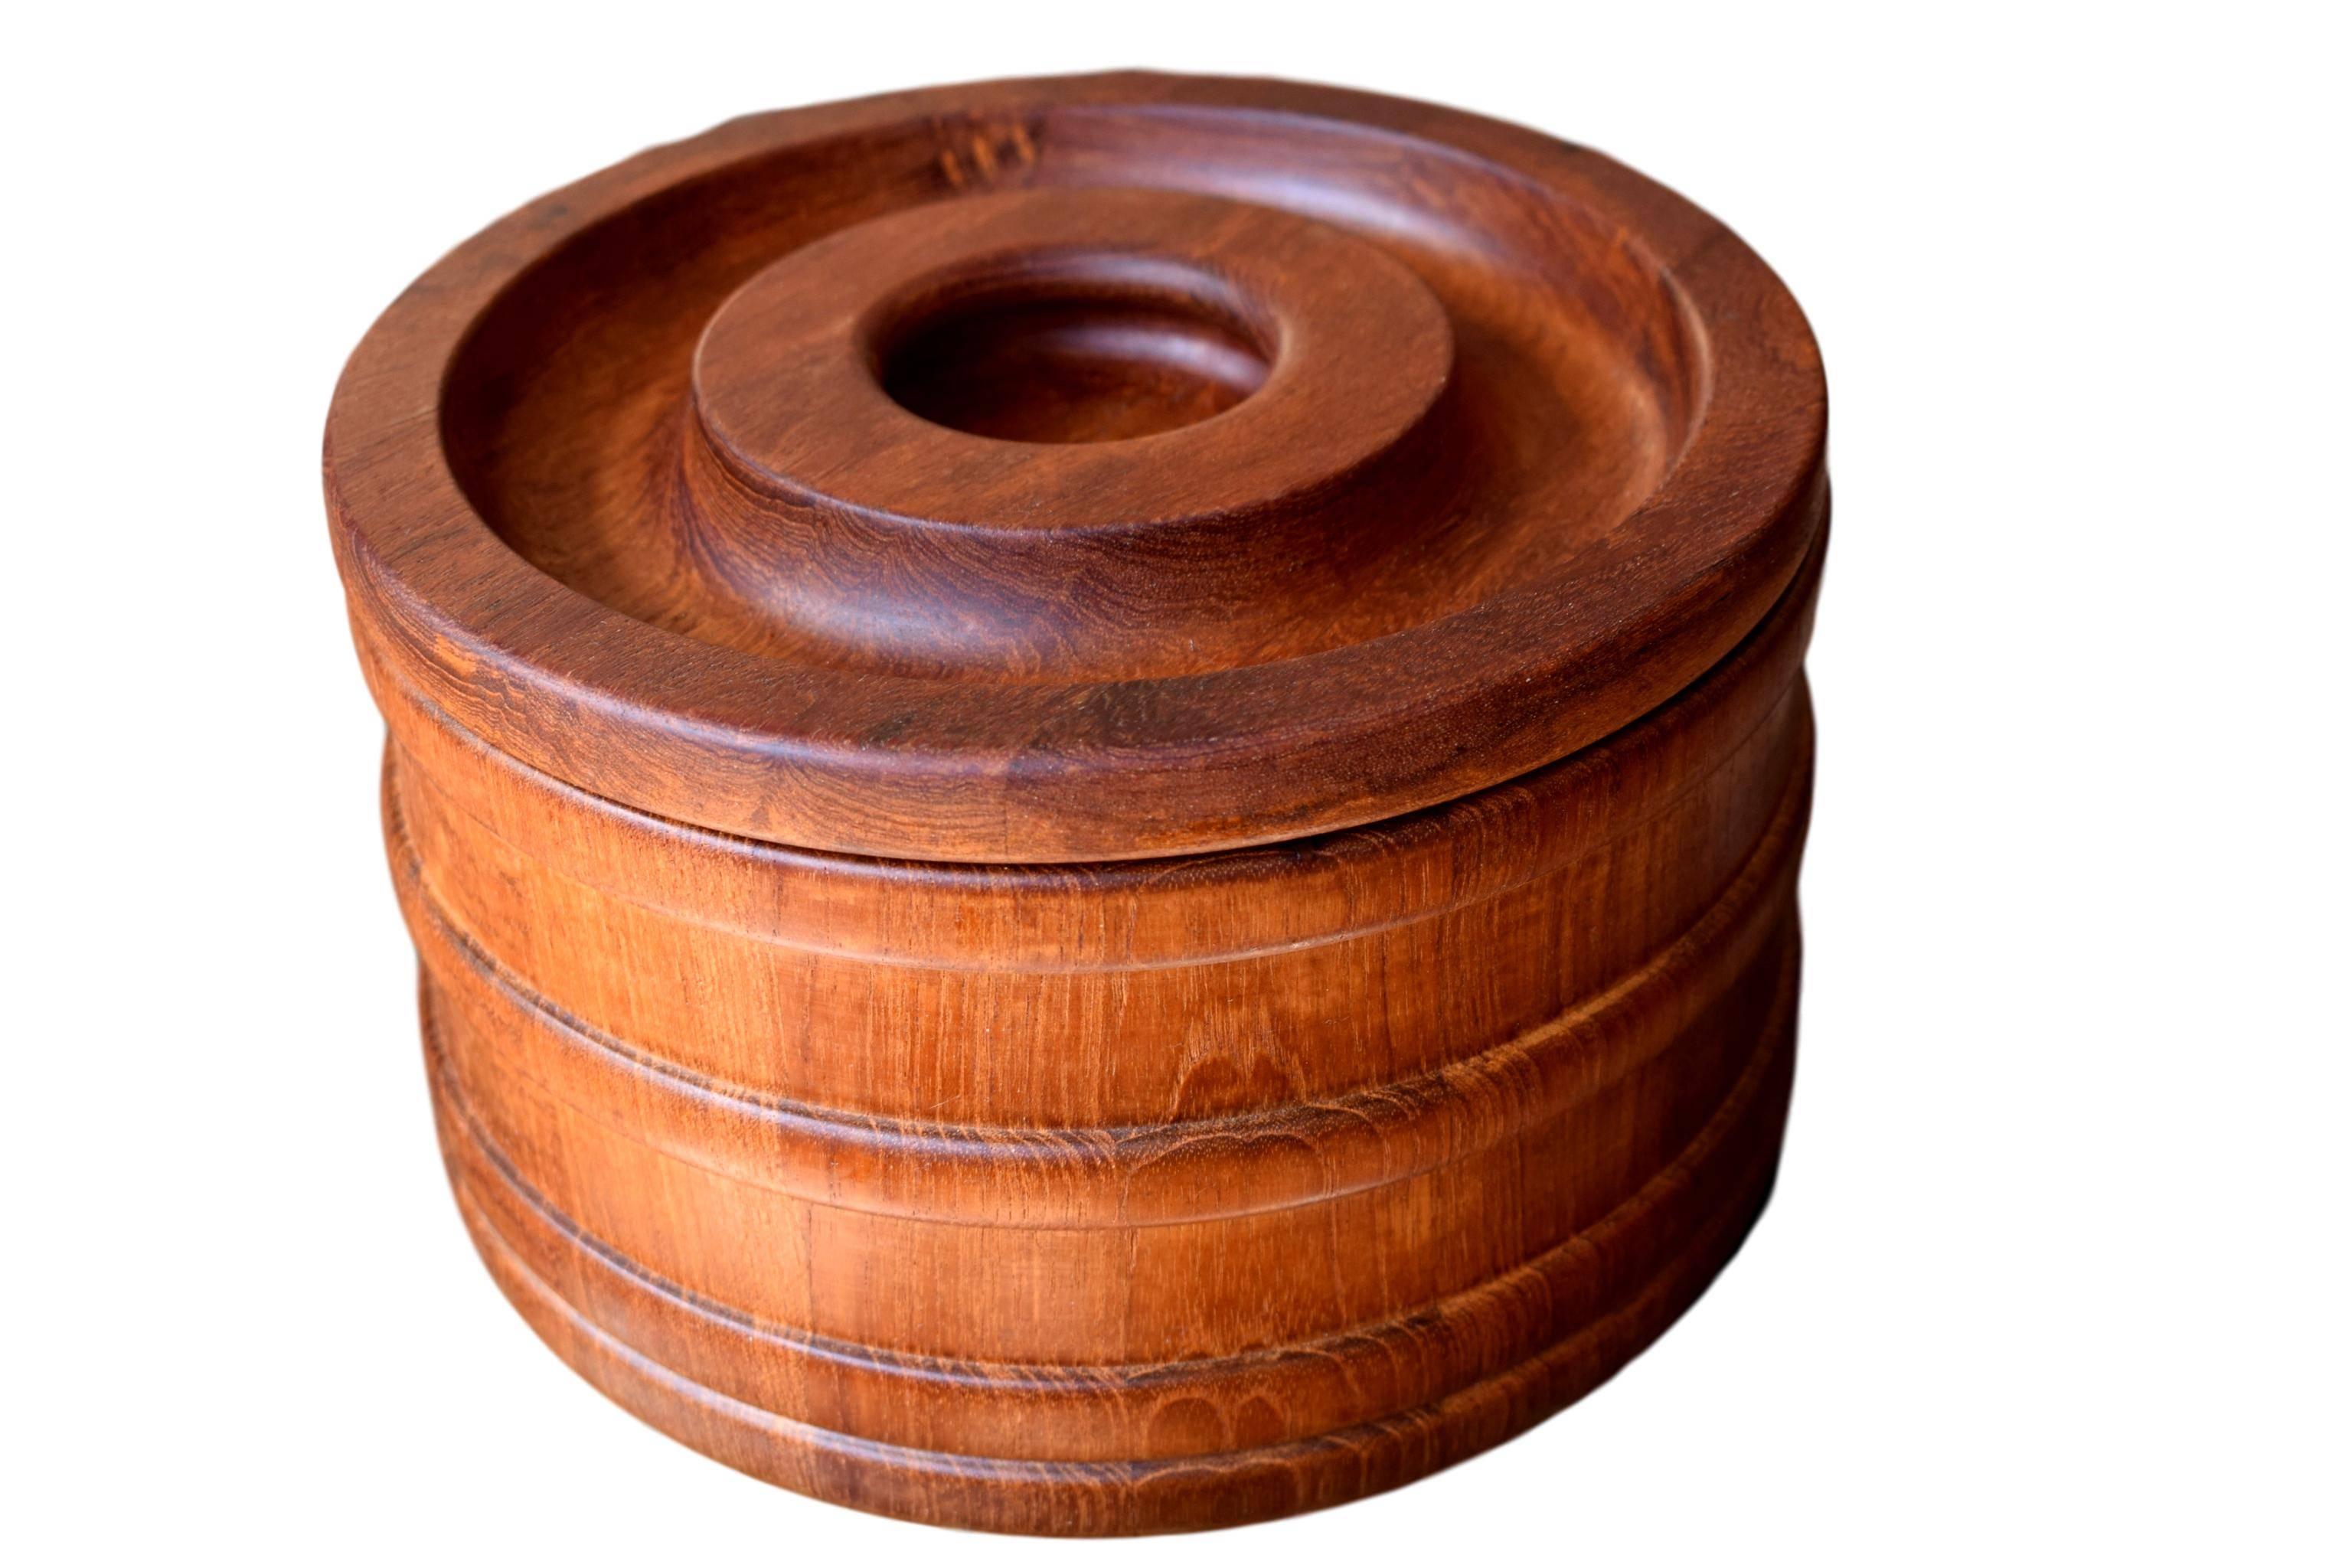 A Danish midcentury ice bucket by Jens Harald Quistgaard (1919-2008) made from staved teak. 

Stamped 